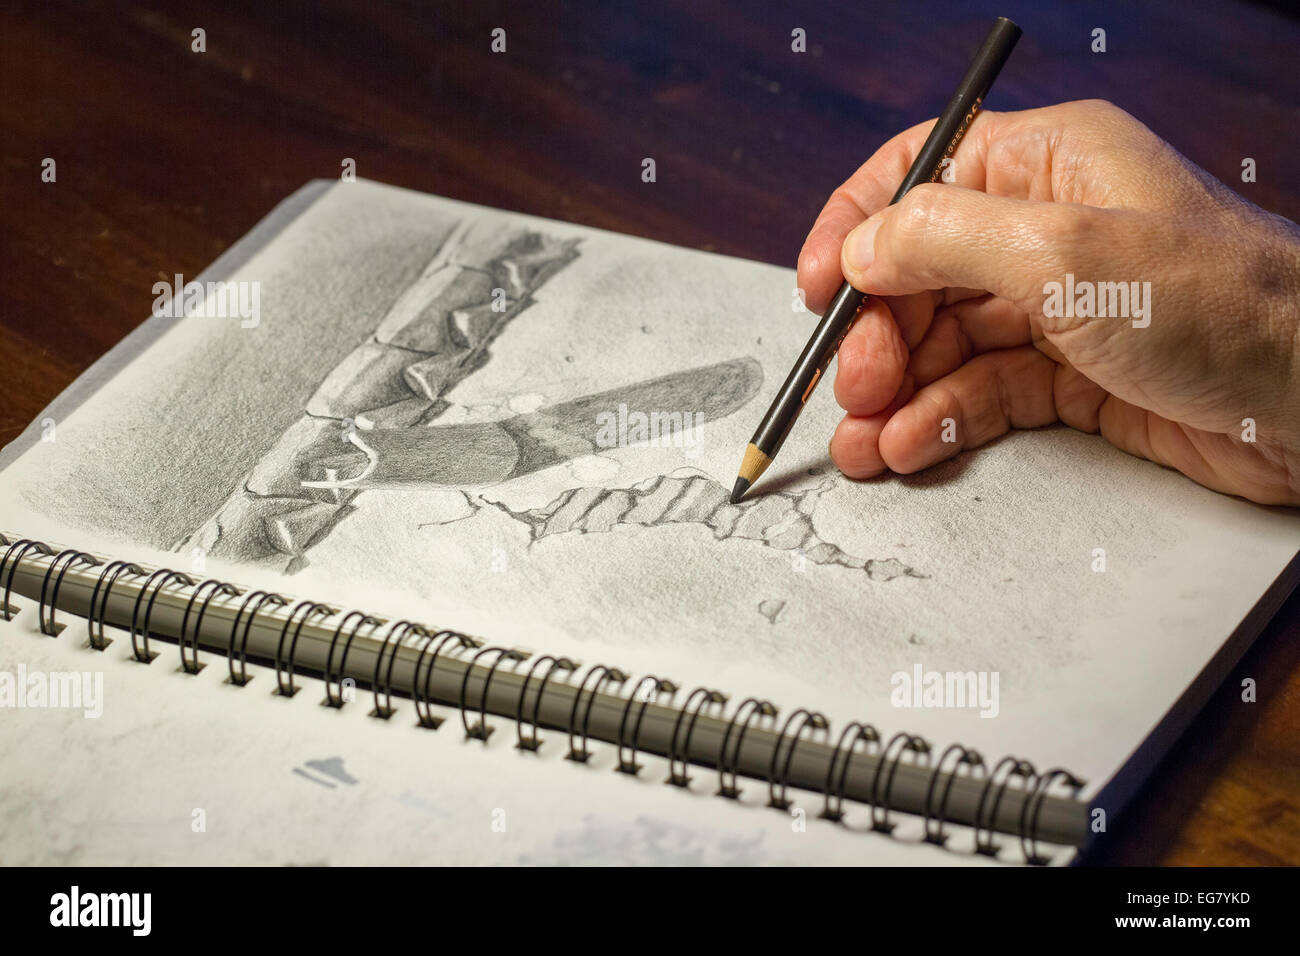 Artist using pencil on paper to draw a picture using lines and shading. Stock Photo